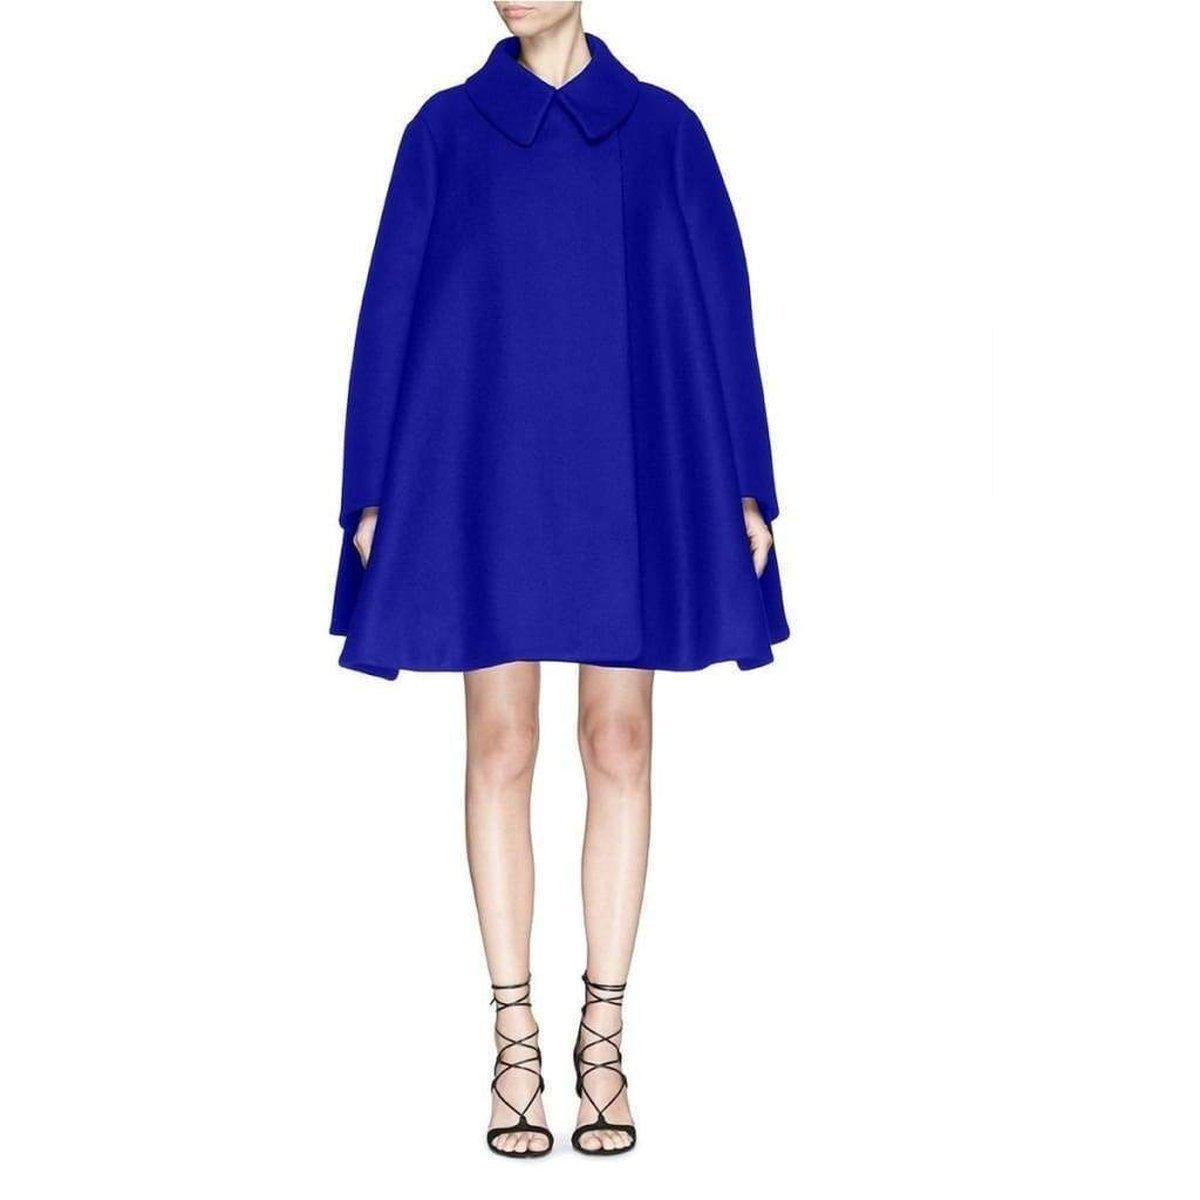 Step out into the open with this bold cape coat from Azzedine Alaïa that will shield you from strong winds with its bountiful silhouette. Delectably enveloping, this felted wool piece can be worn over any ensemble with its roomy form. Steer clear